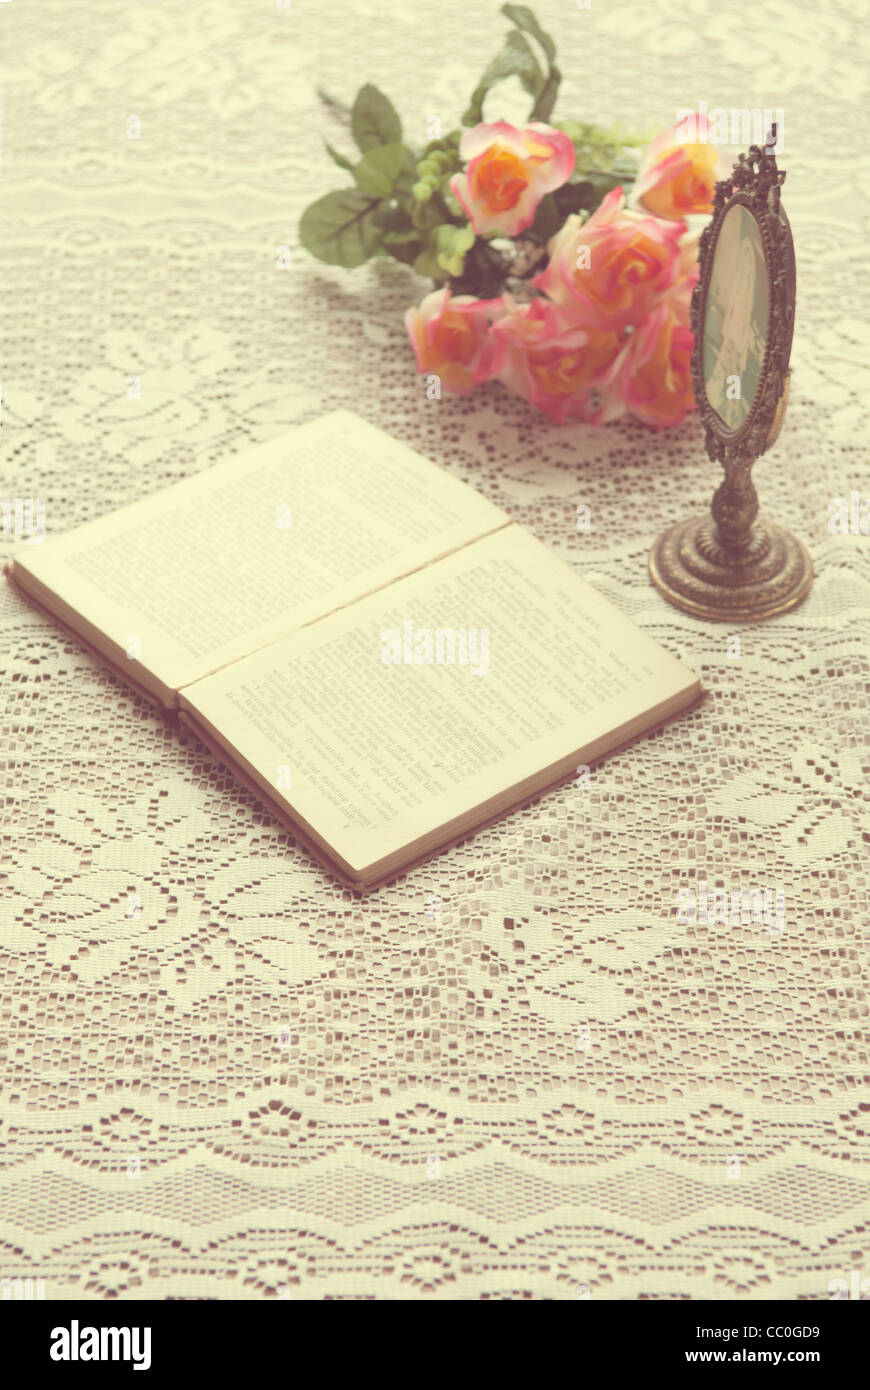 Open book next to oval shaped frame and a bouquet of roses Stock Photo